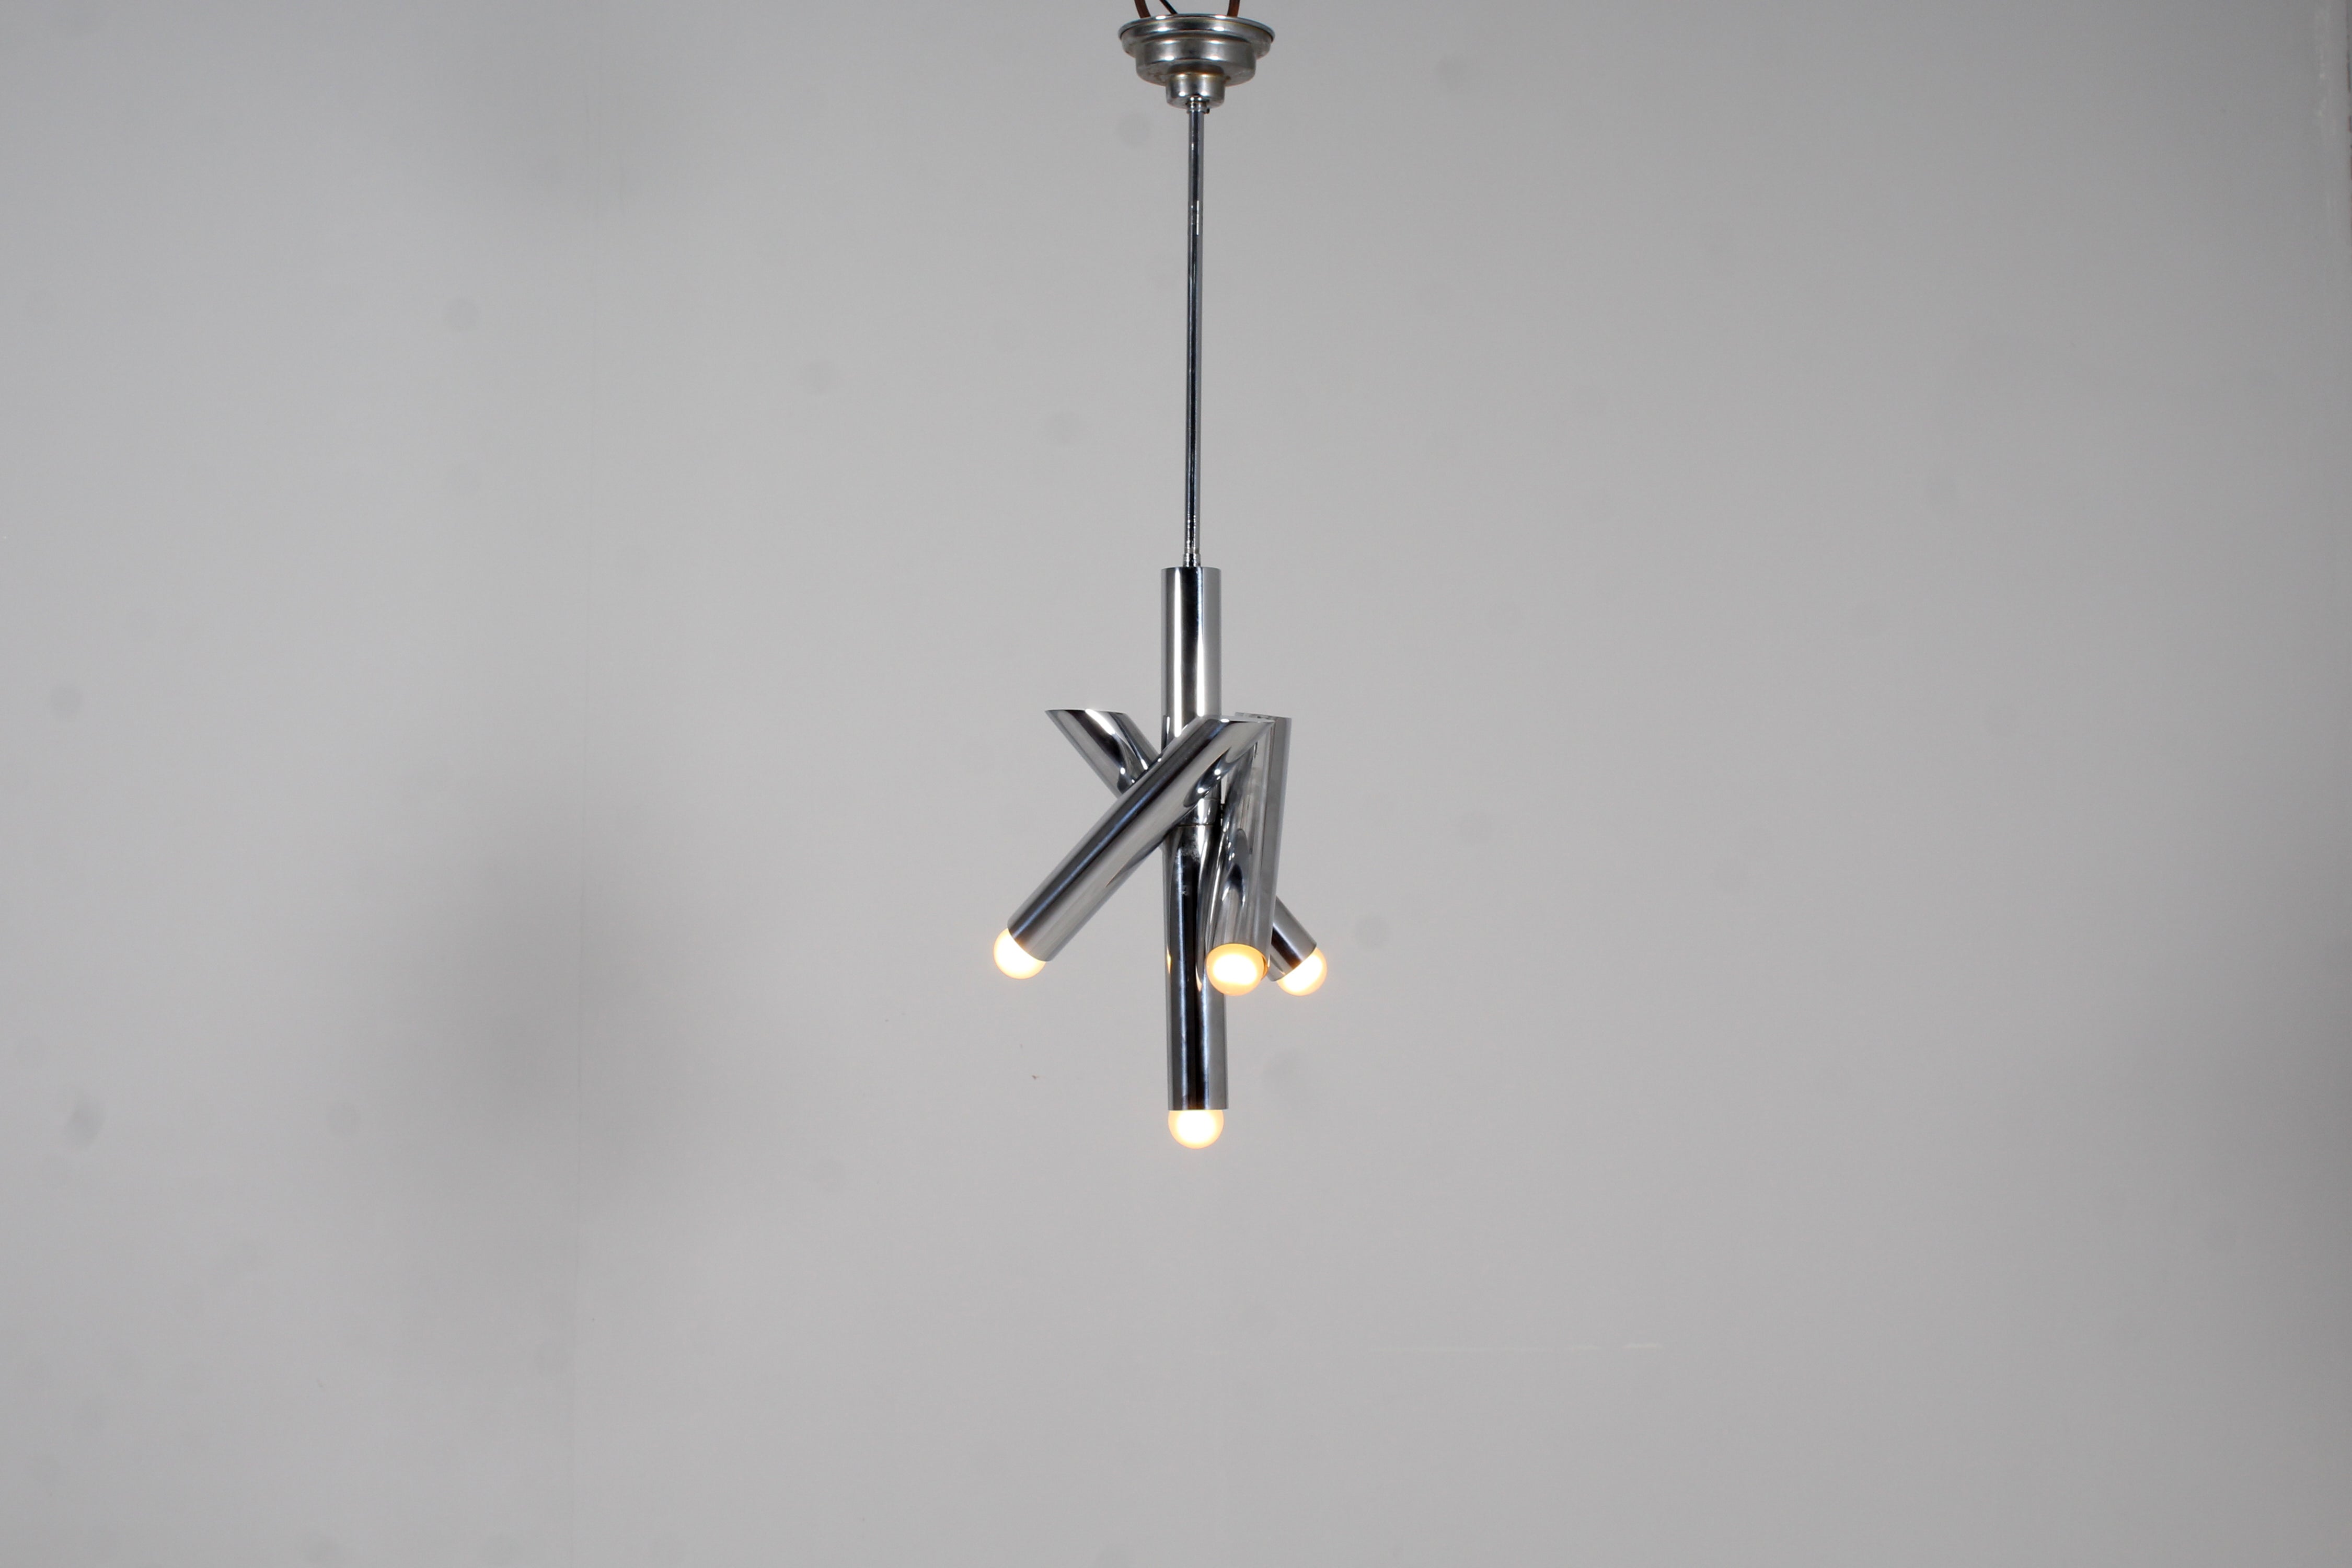 Captivating Space Age suspension lamp in chromed steel tubes with four lights, with three adjustable spots on a fixed central cylindrical body. Attributable to Reggiani, Italian production in the 70s
Wear consistent with age and use.